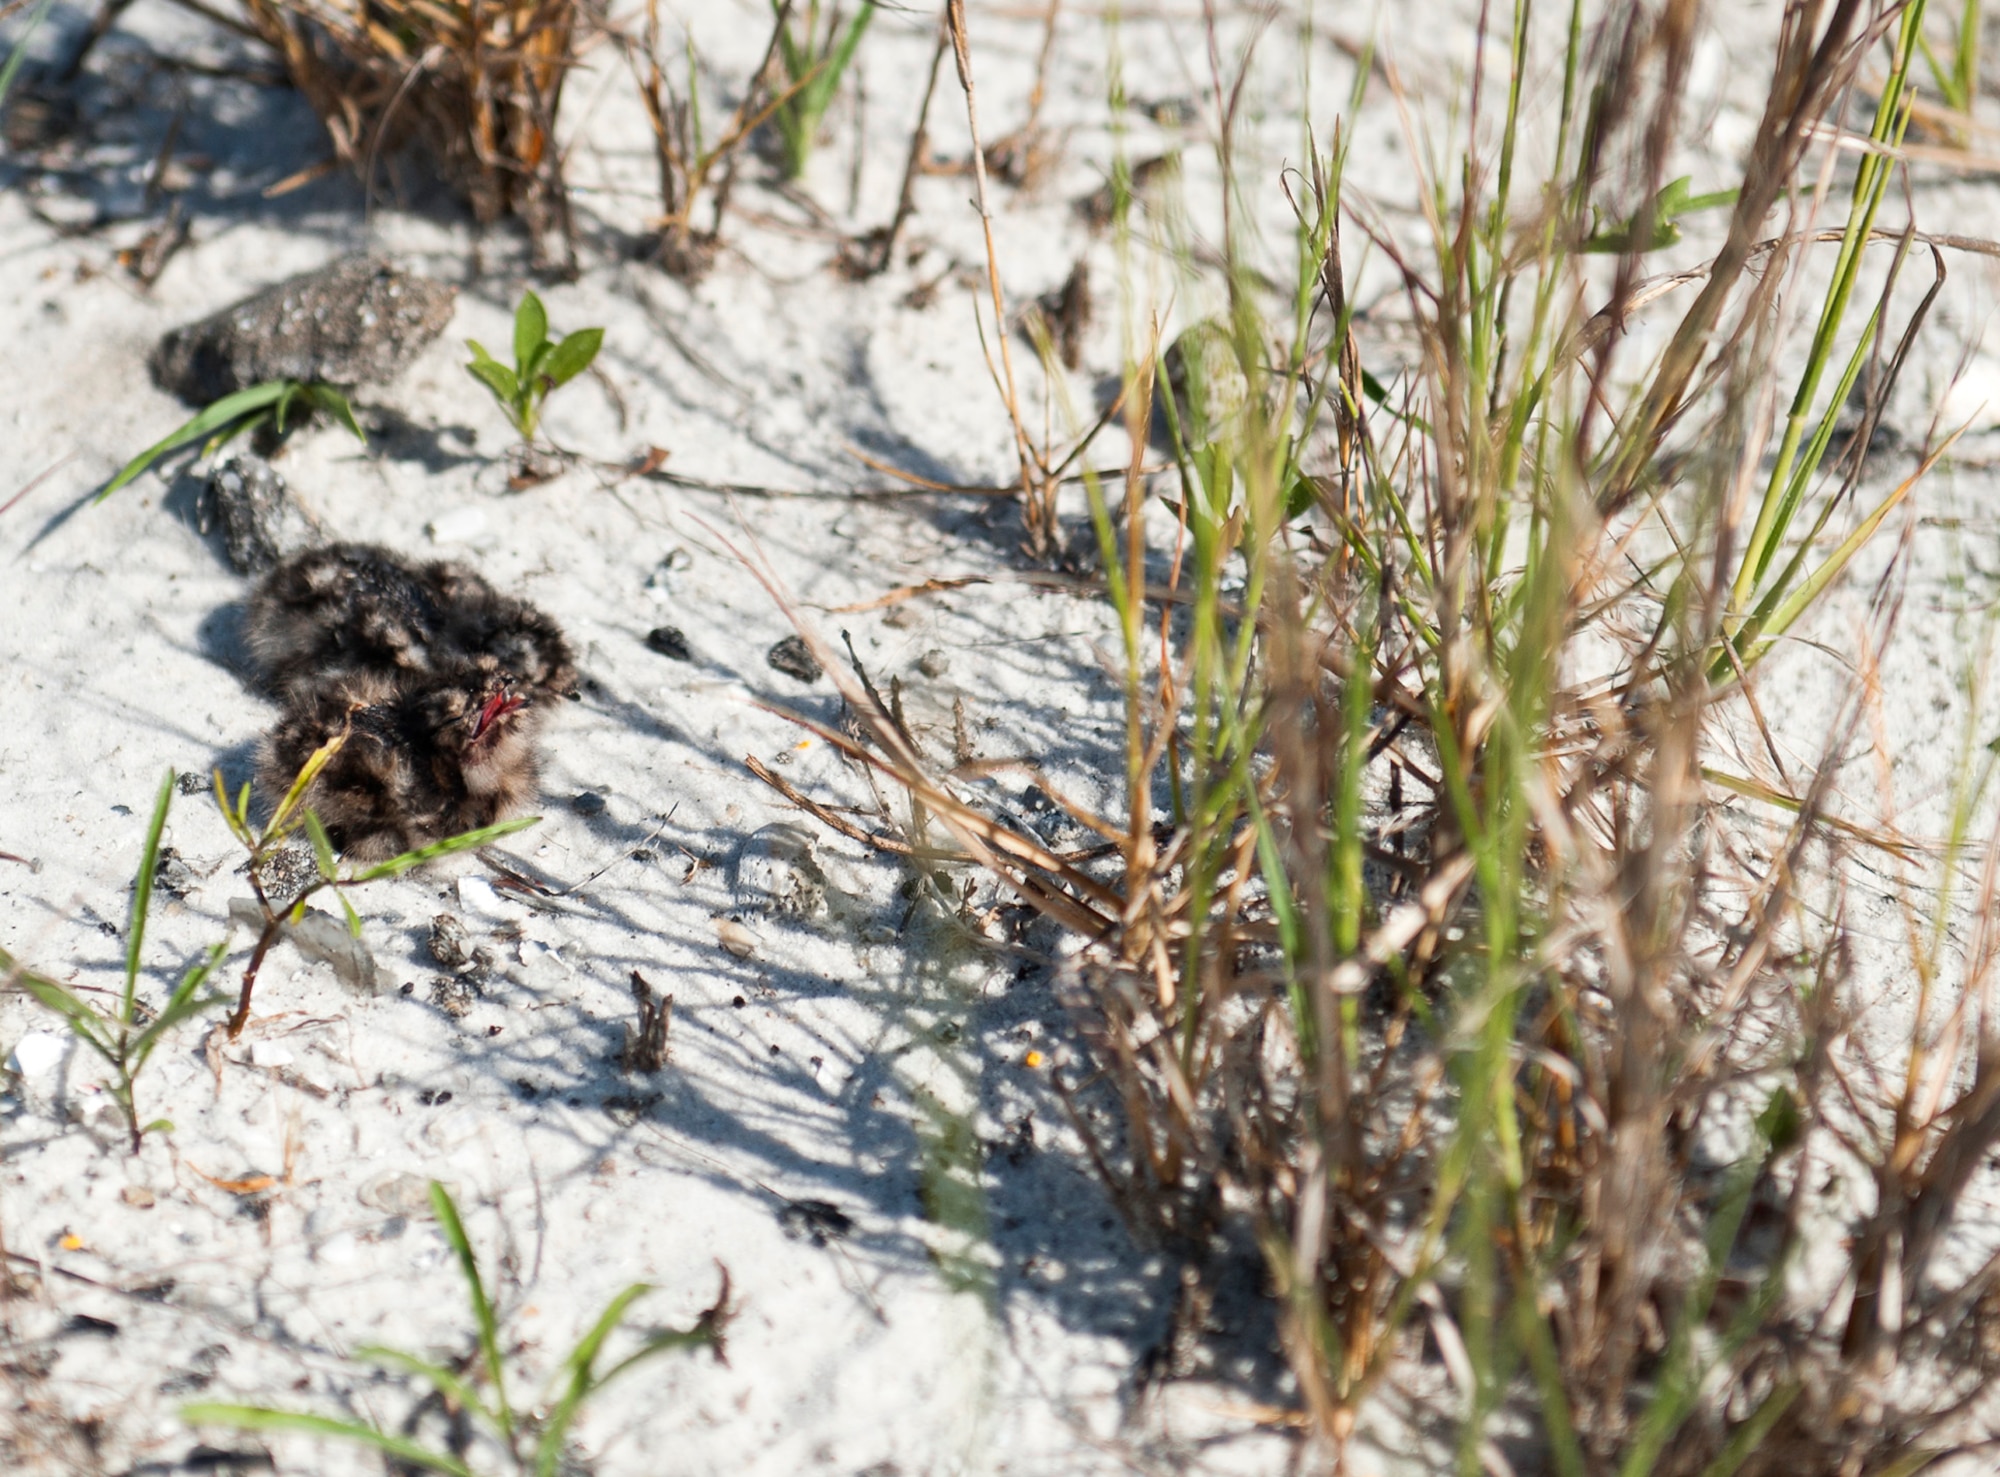 Two common nighthawk chicks wait for their mother's return on the Santa Rosa Island Range July 14 at Eglin Air Force Base, Fla. Nighthawks are known for nesting on open ground. The 96th Civil Engineer Group’s, Jackson Guard biologists and volunteers track and monitor wildlife on the water range. The information gathered is used to avoid and protect wildlife during military test and training missions. (U.S. Air Force photo/Ilka Cole) 